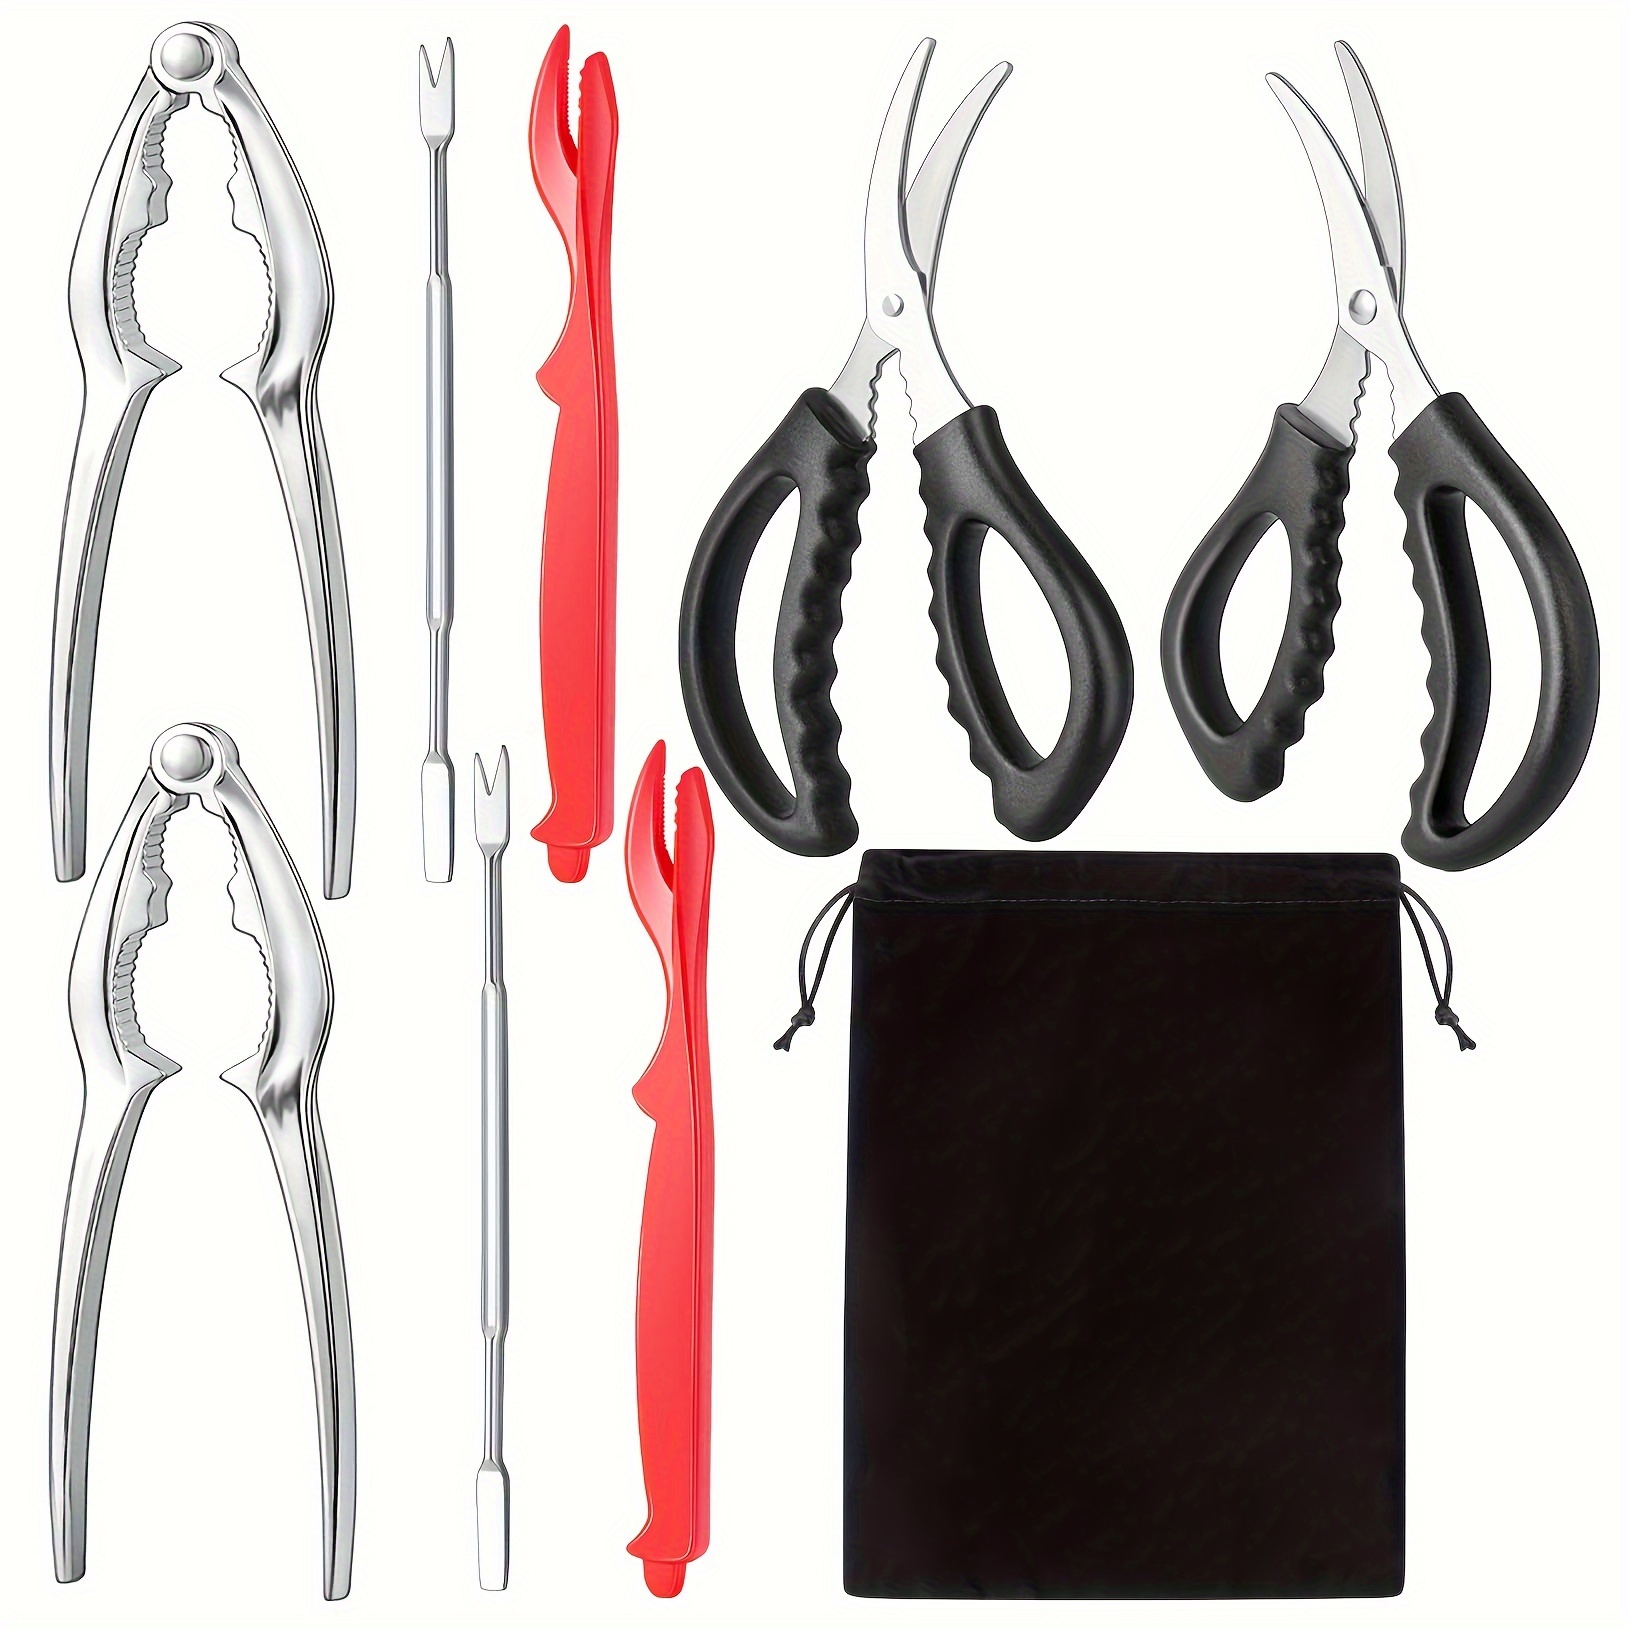 

4-piece Seafood Tool Set With Stainless Steel Crab Crackers, Lobster , Seafood Scissors, Forks And Storage Pouch - Durable Seafood Cracking & Shelling Kit